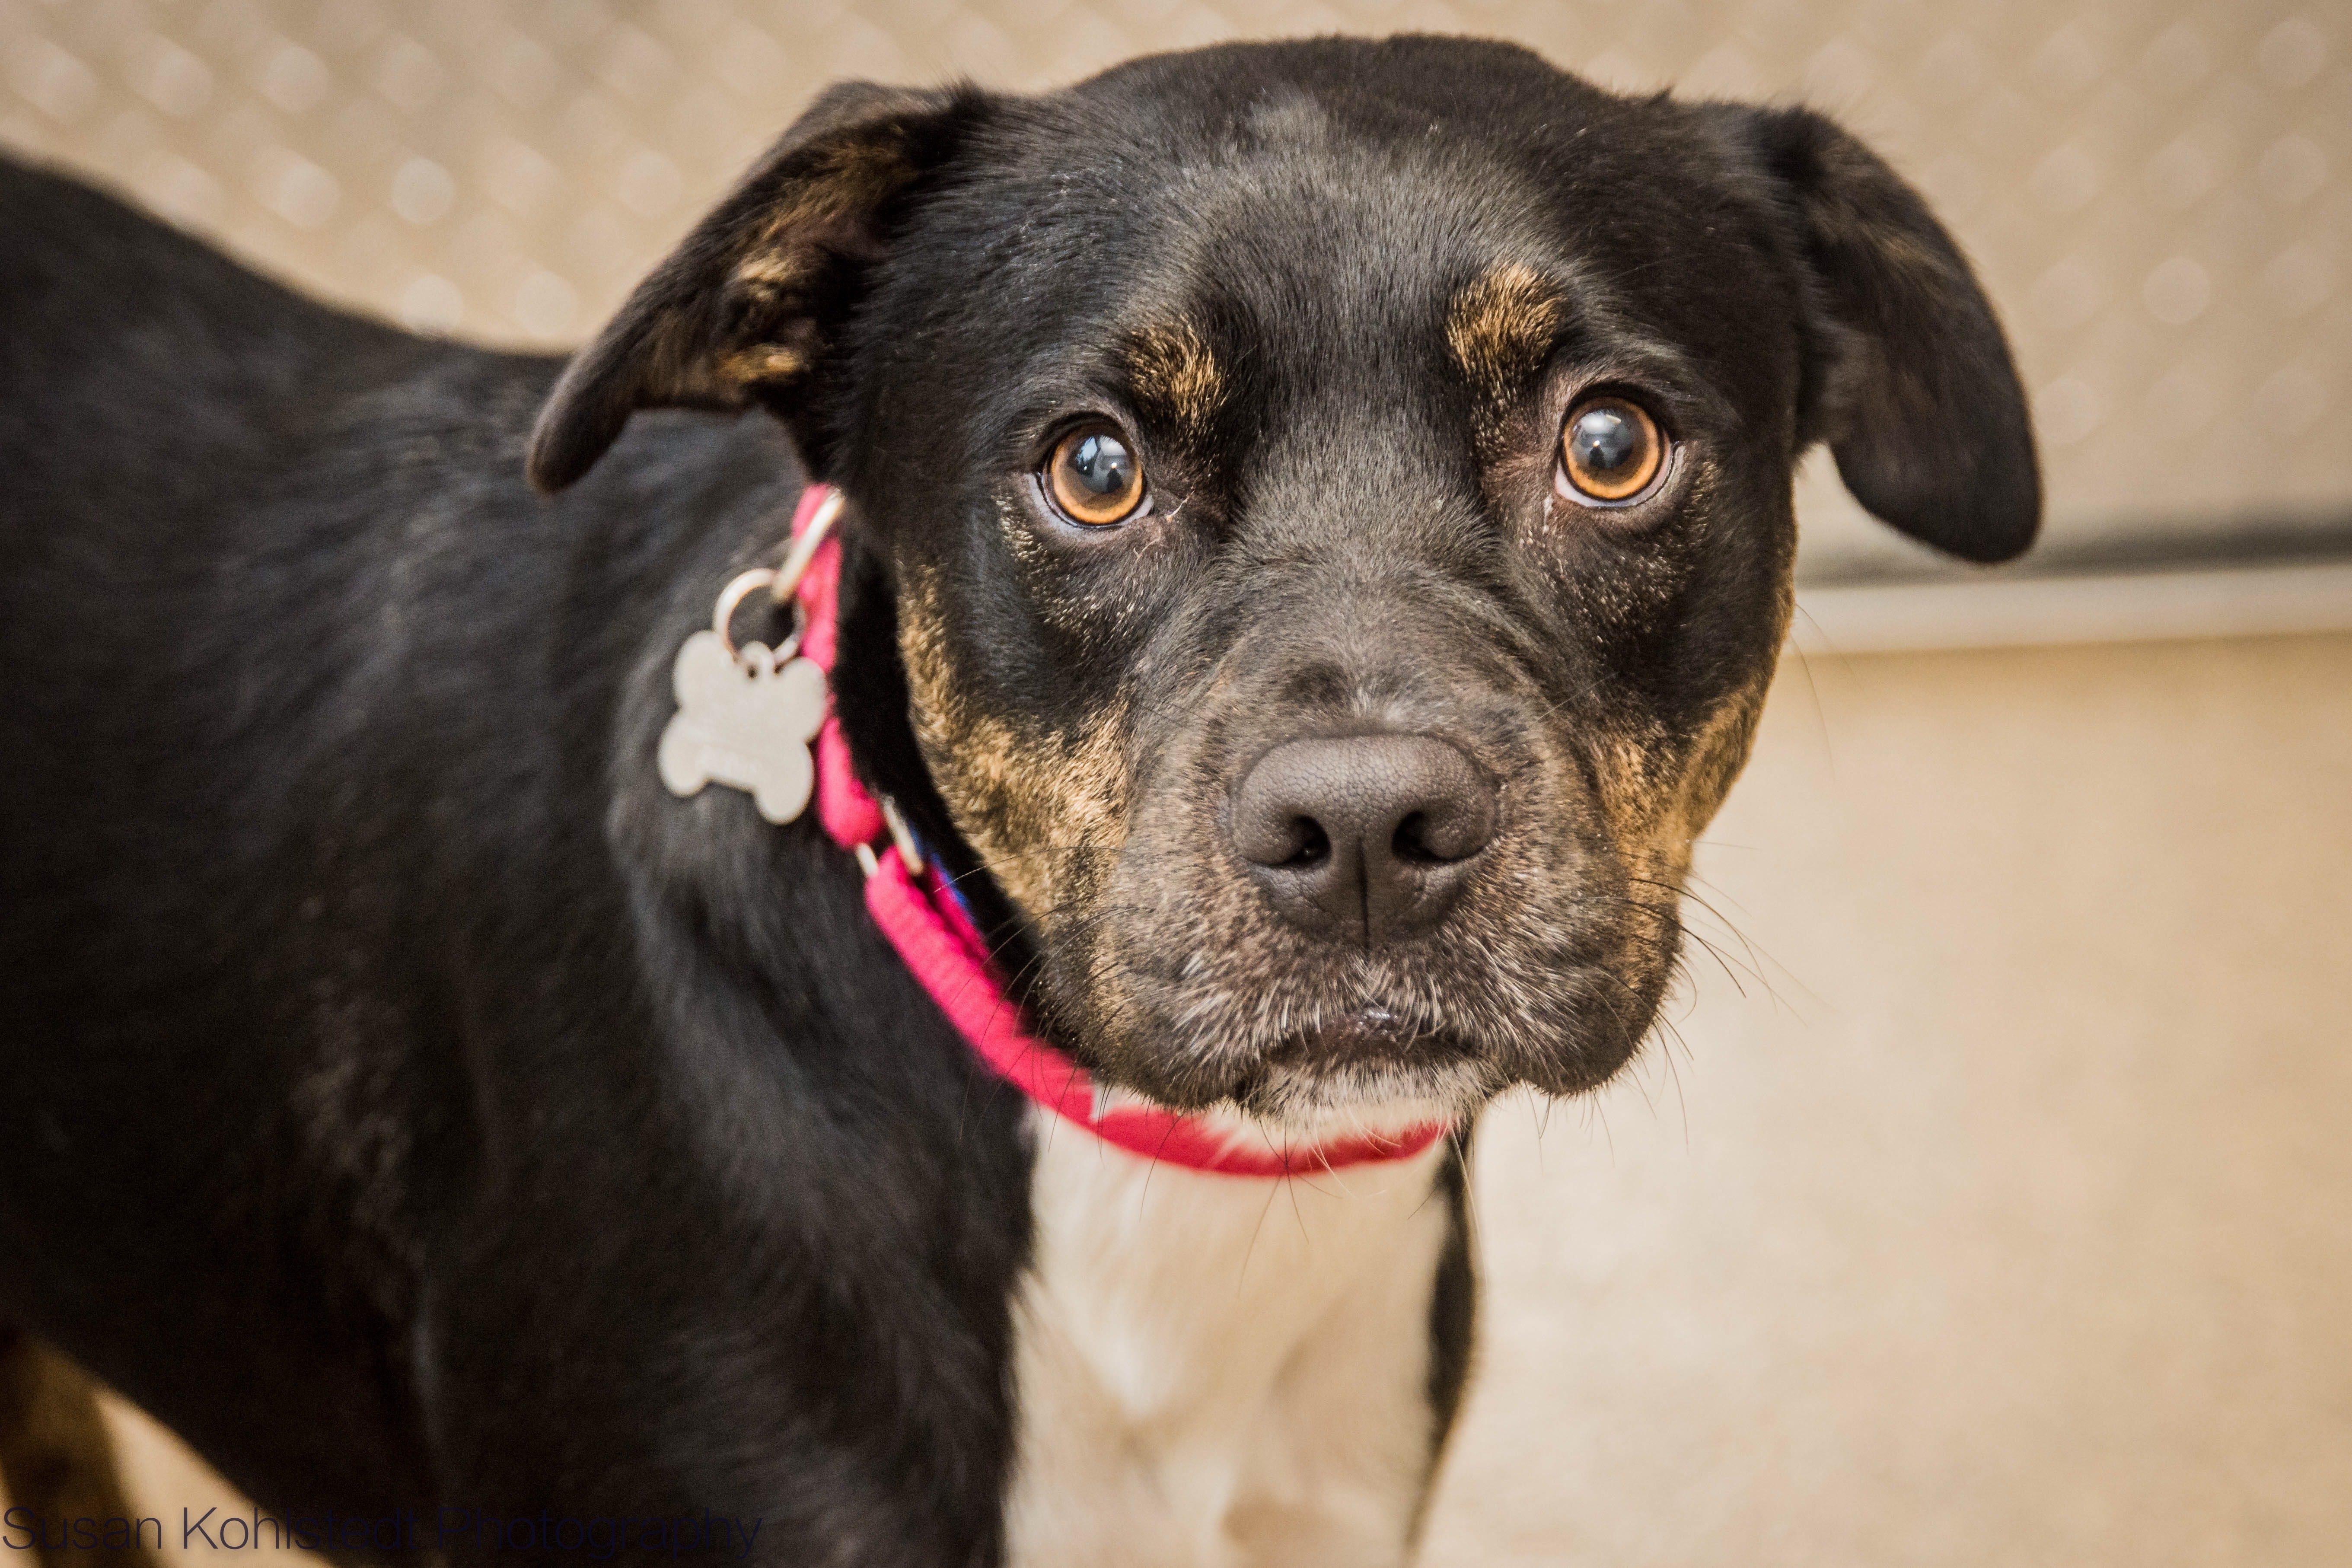 Ethan is a 2-year-old shepherd mix. He does well with other dogs and even some cats. Come meet Ethan at Humane Society of Tennessee Valley, 6717 Kingston Pike.